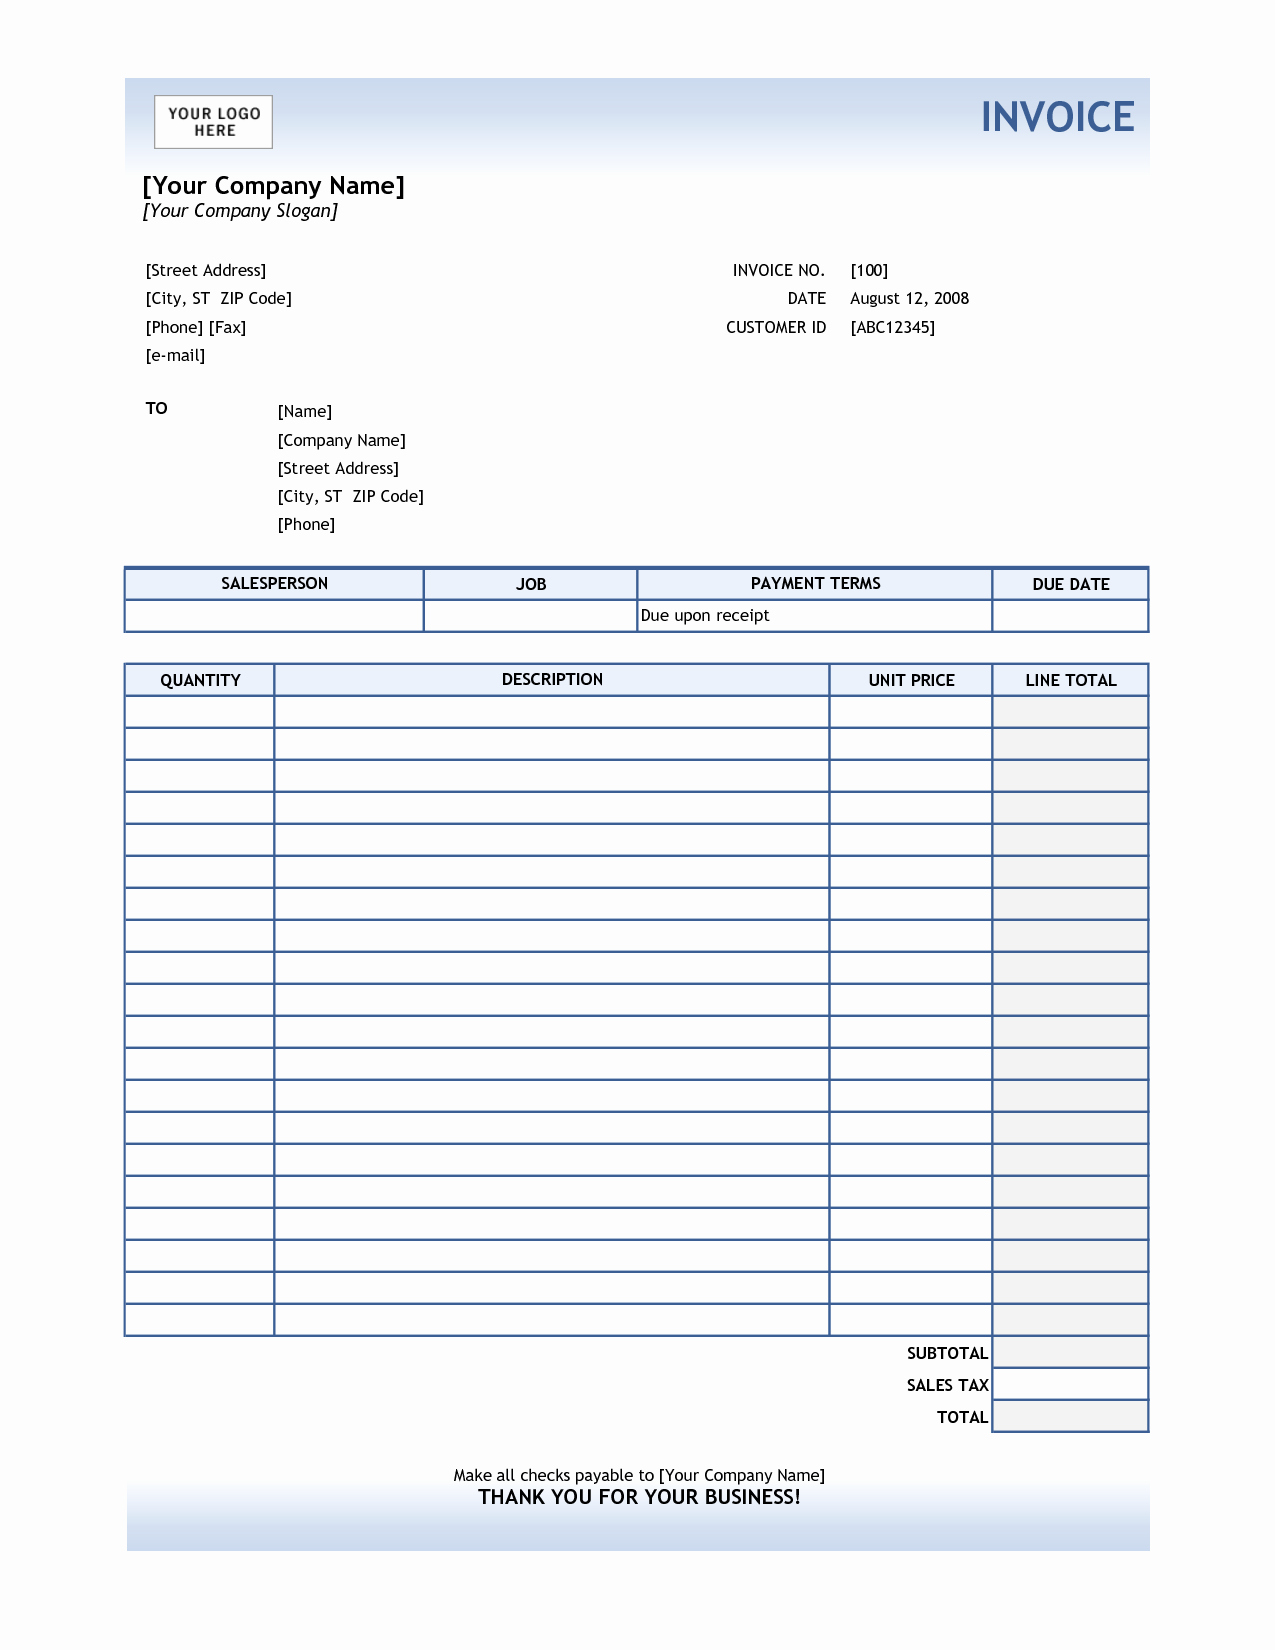 Blank Invoice Template Free Fresh Service Invoice Template Excel